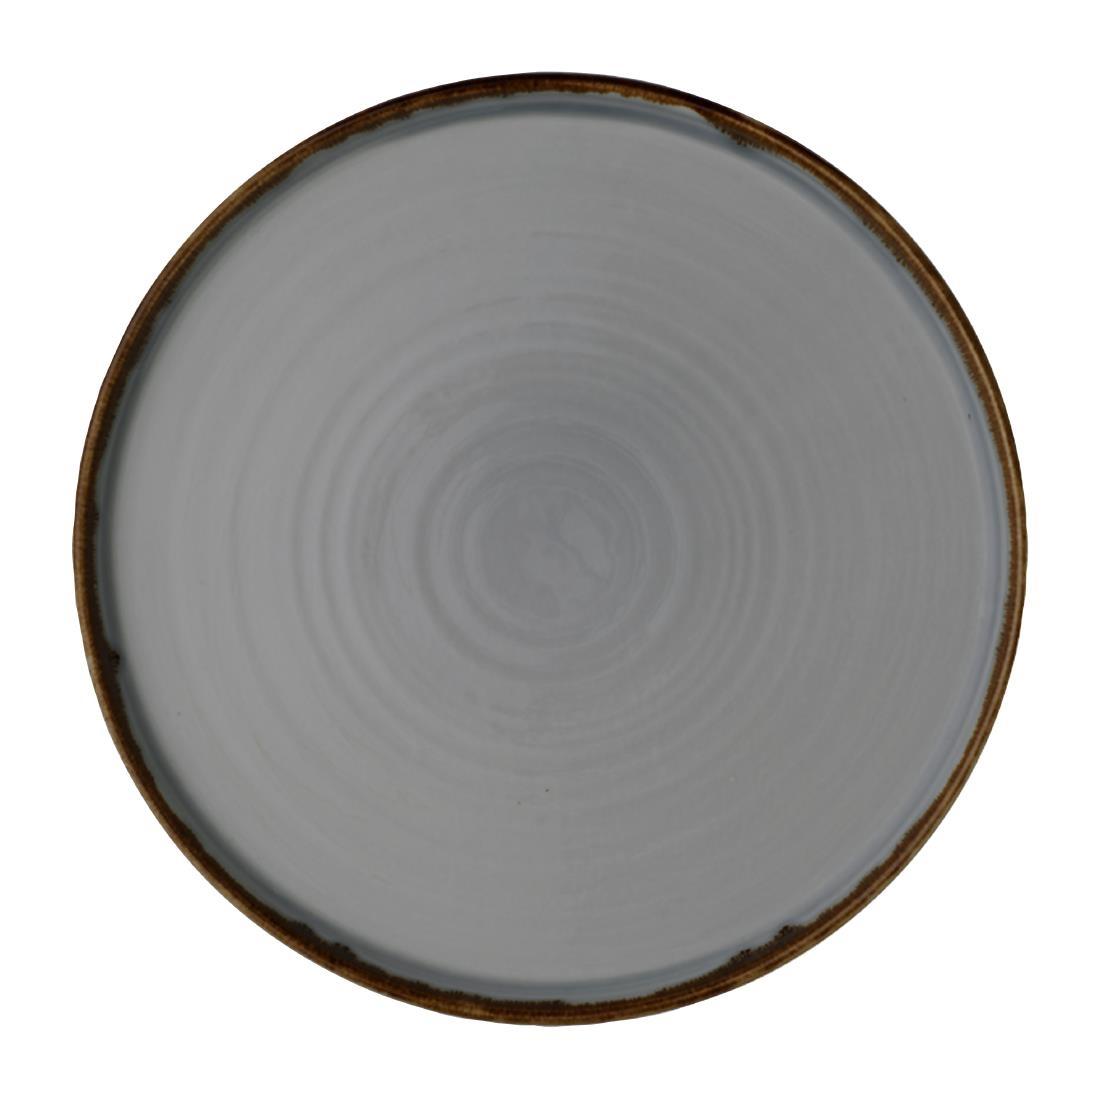 Dudson Harvest Walled Plates Grey 260mm (Pack of 6) - FX151  - 1